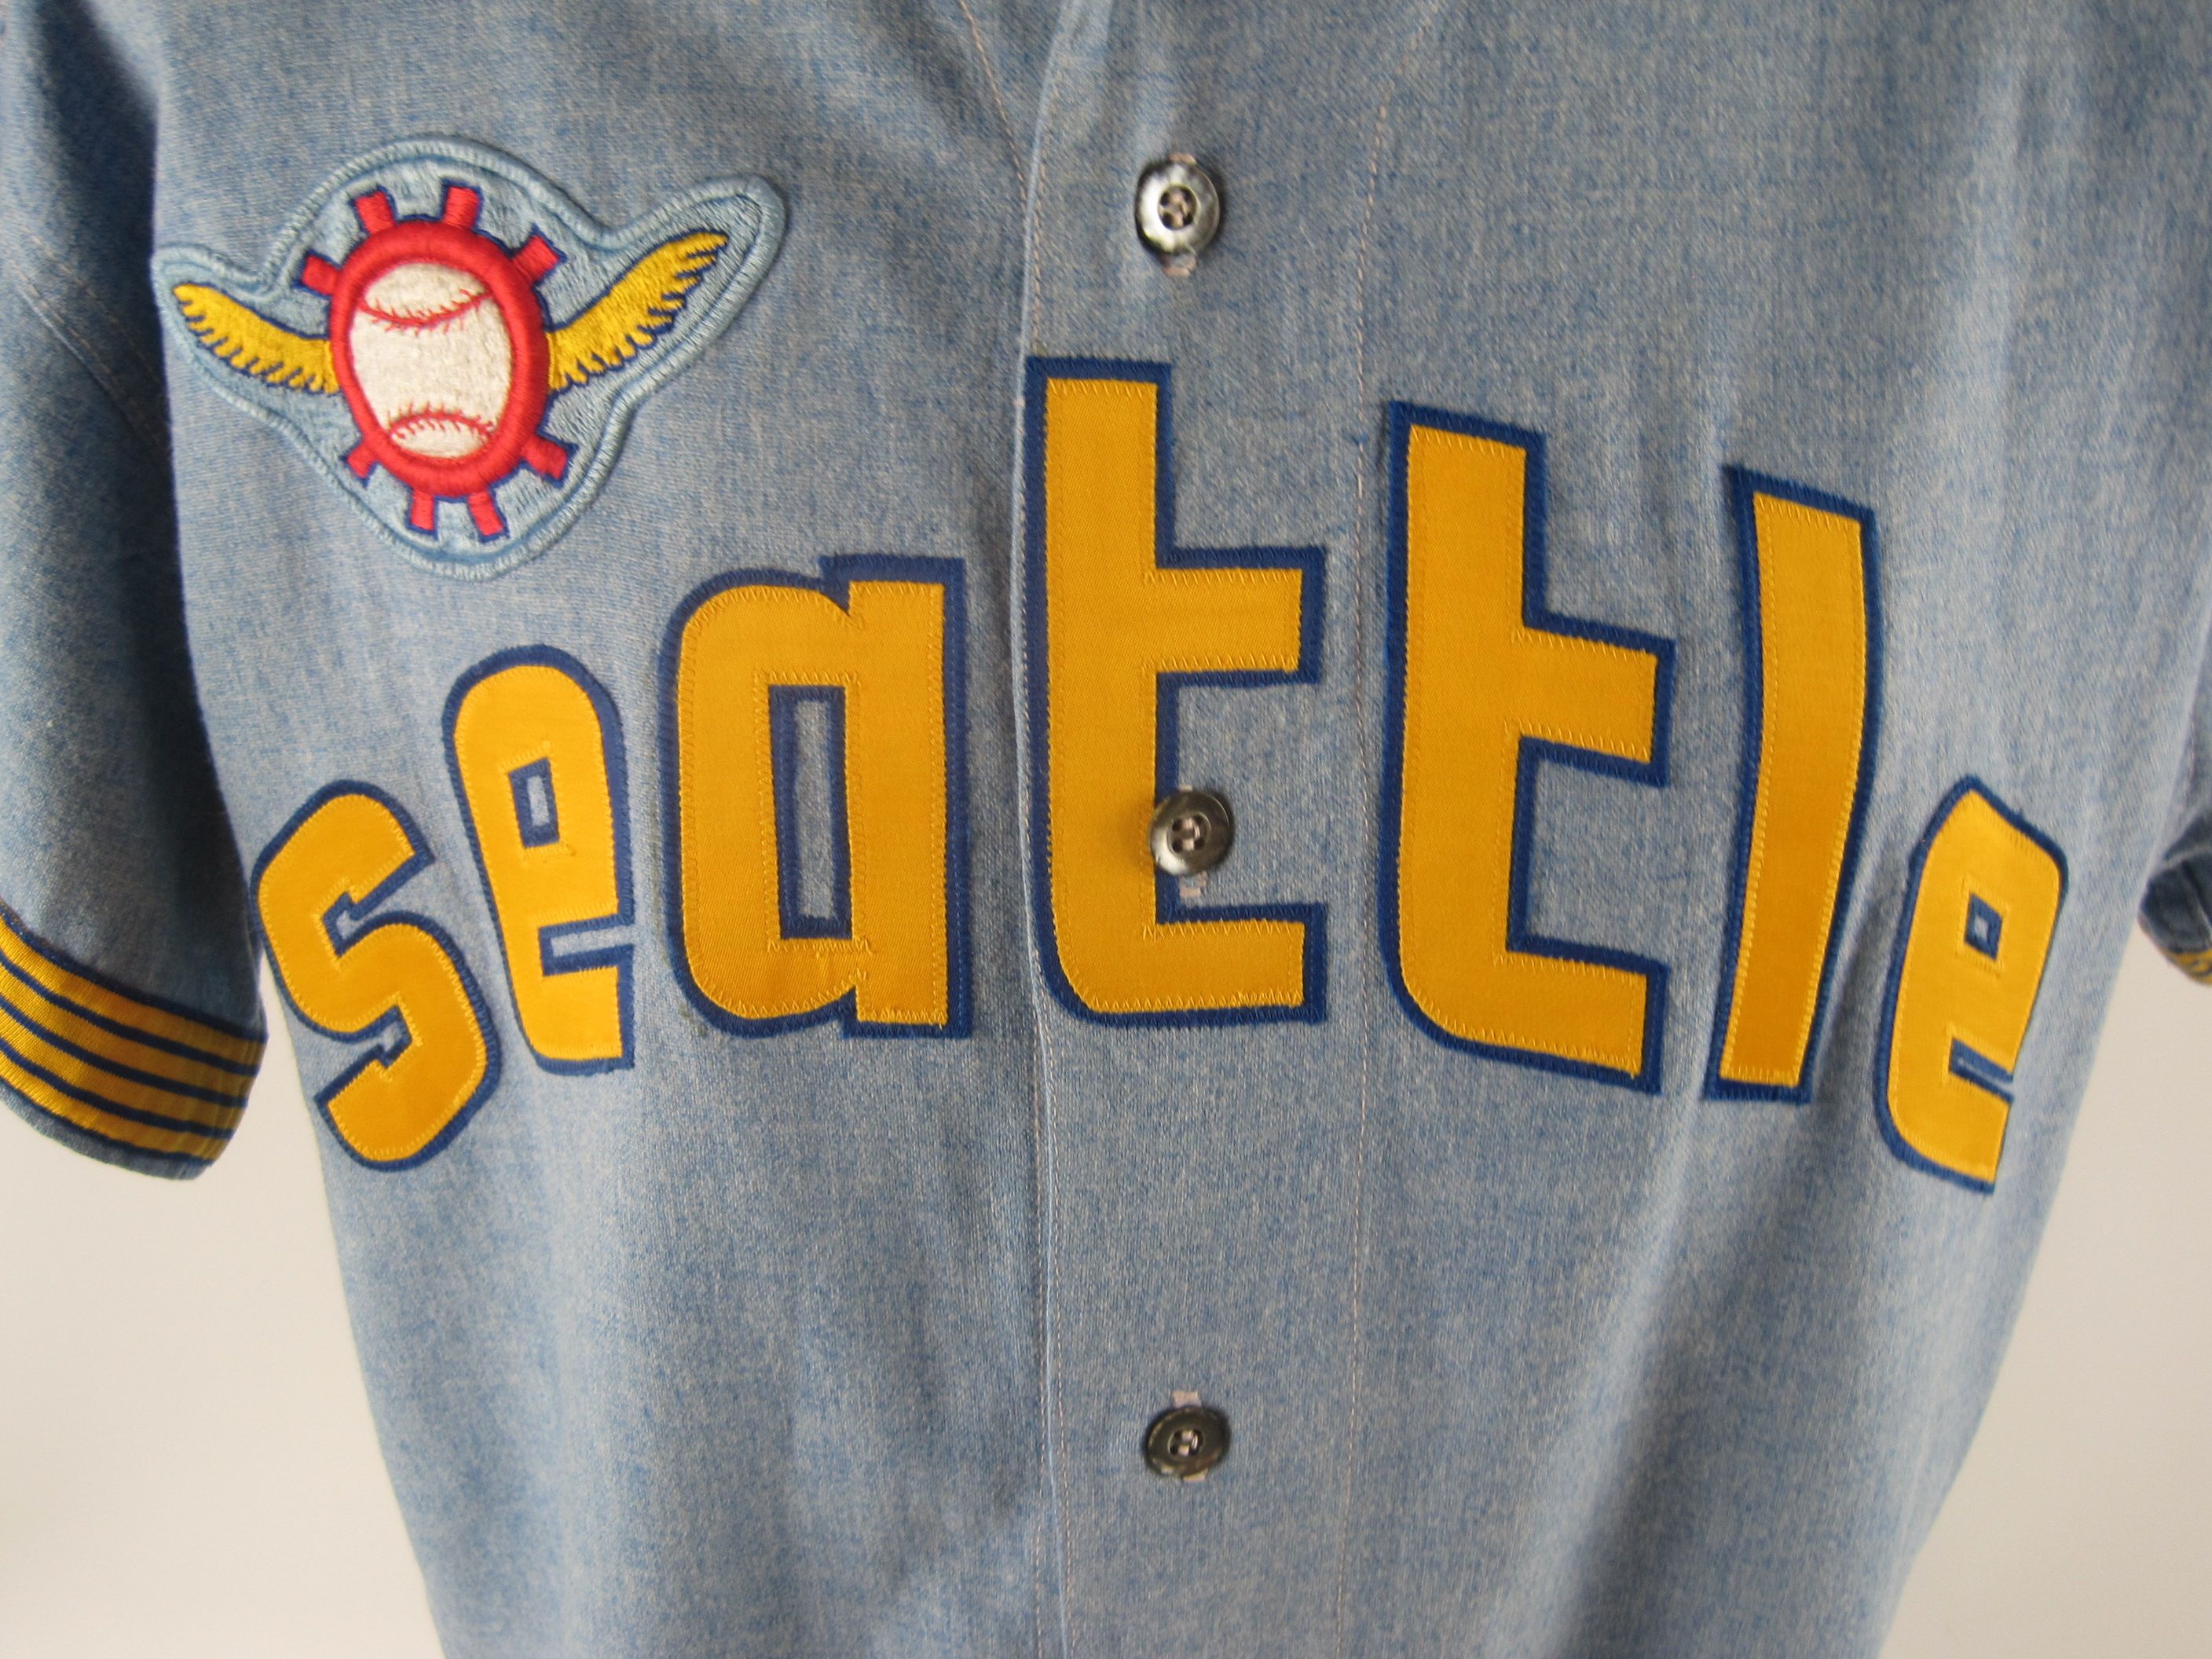 The Seattle Pilots throwback jerseys worn by the Seattle Mariners